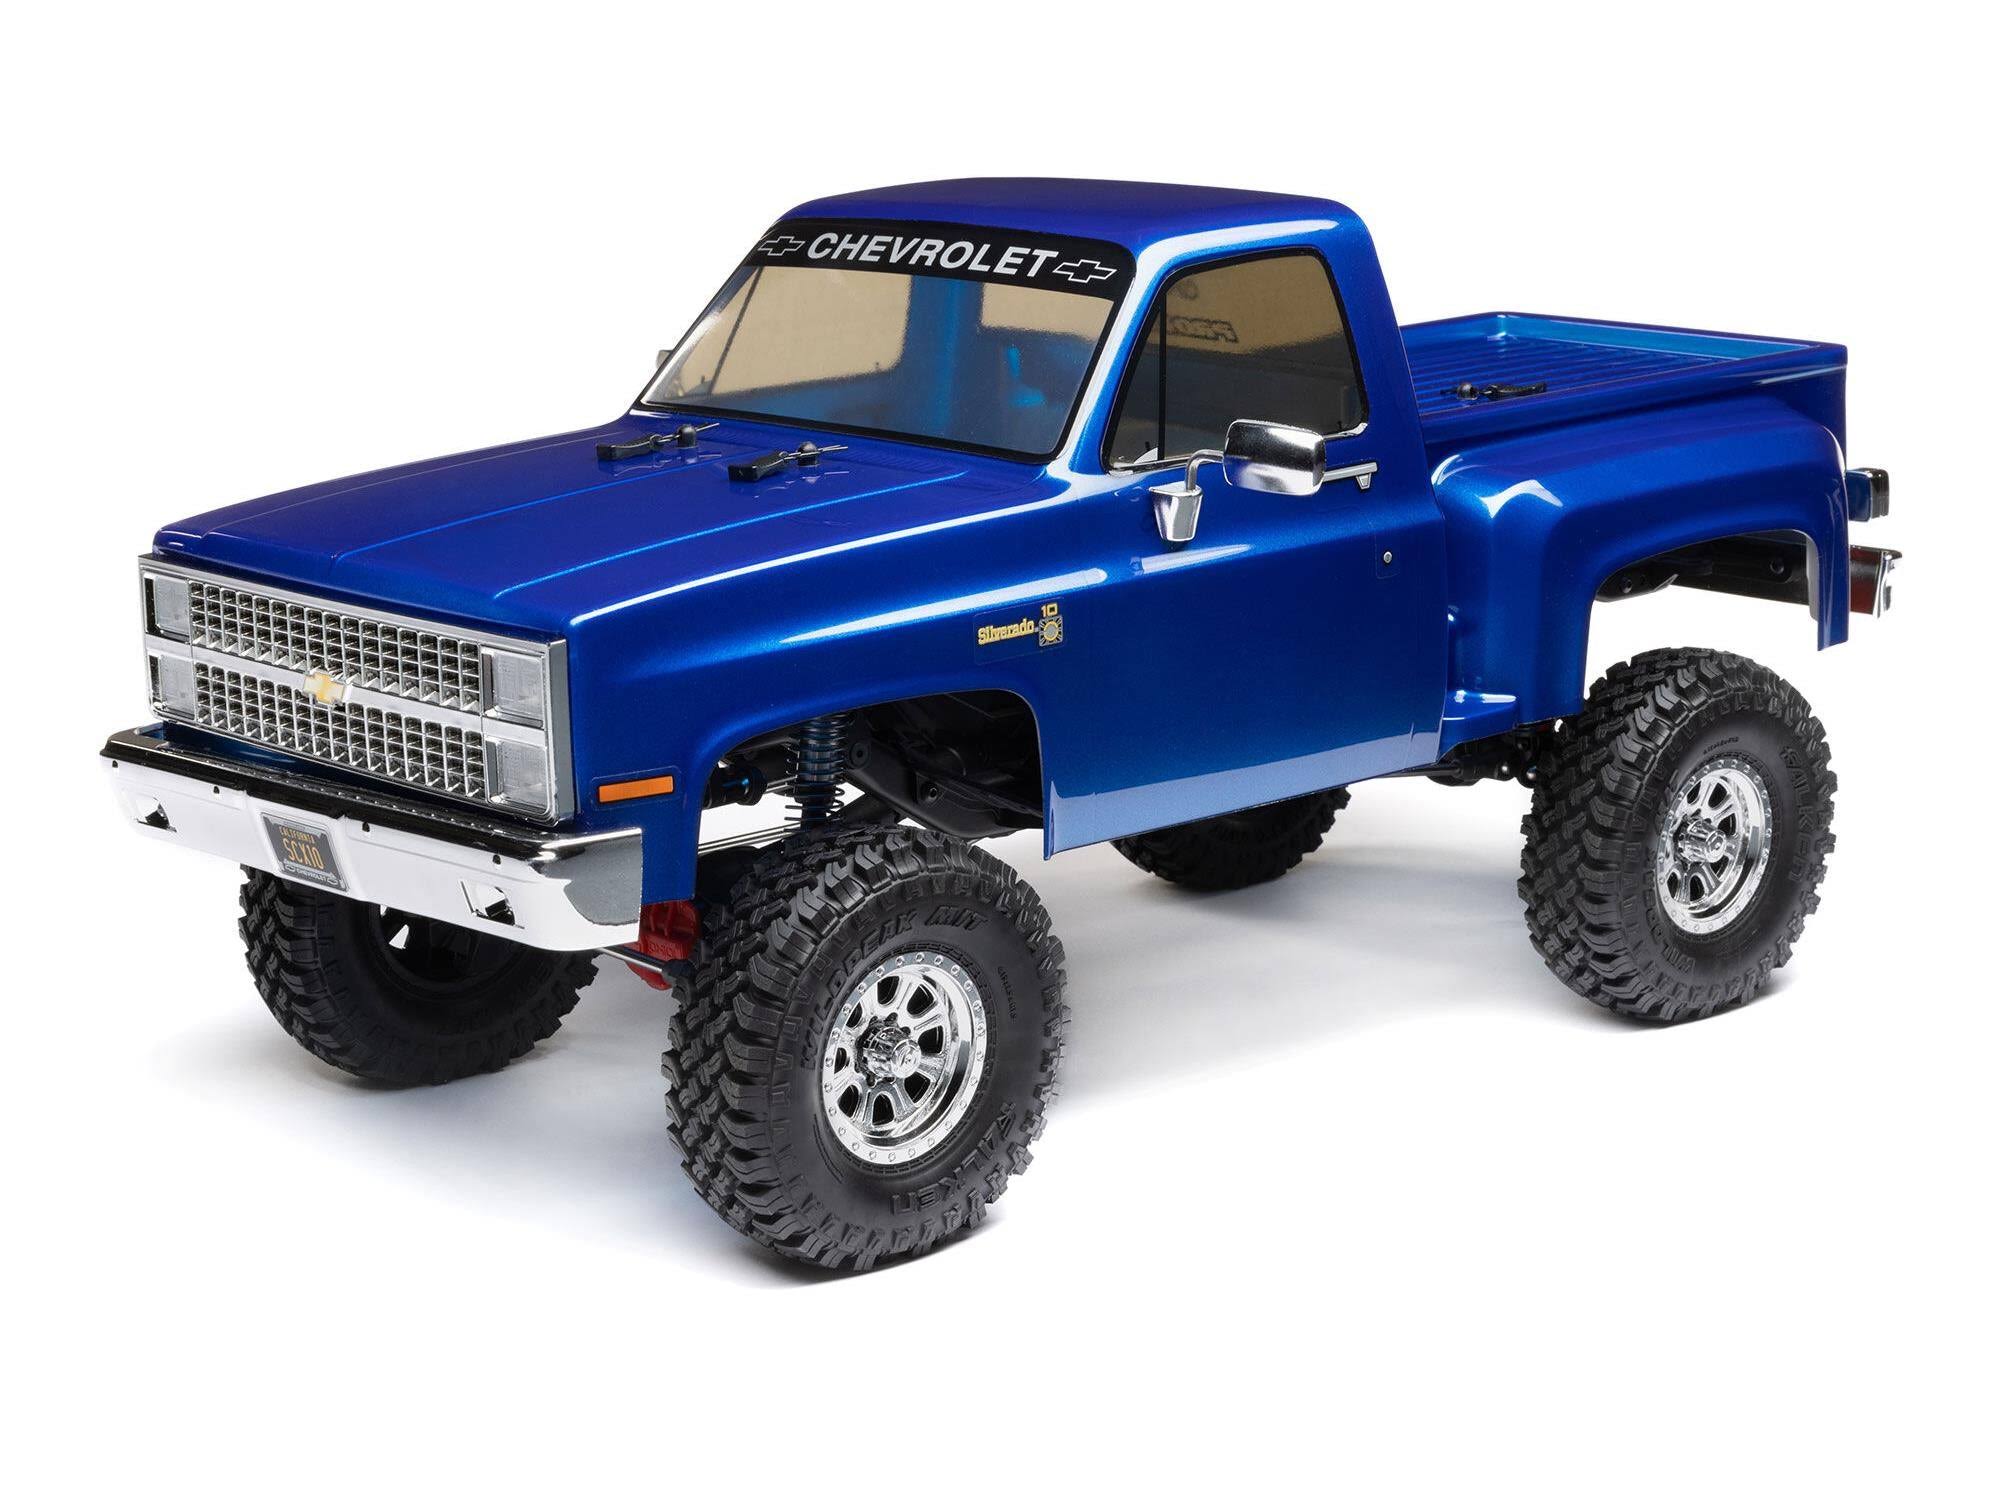 Axial Scx10 III Base Camp '82 Chevy K10 Rock Crawler RTR, Blue, AXI03030T1